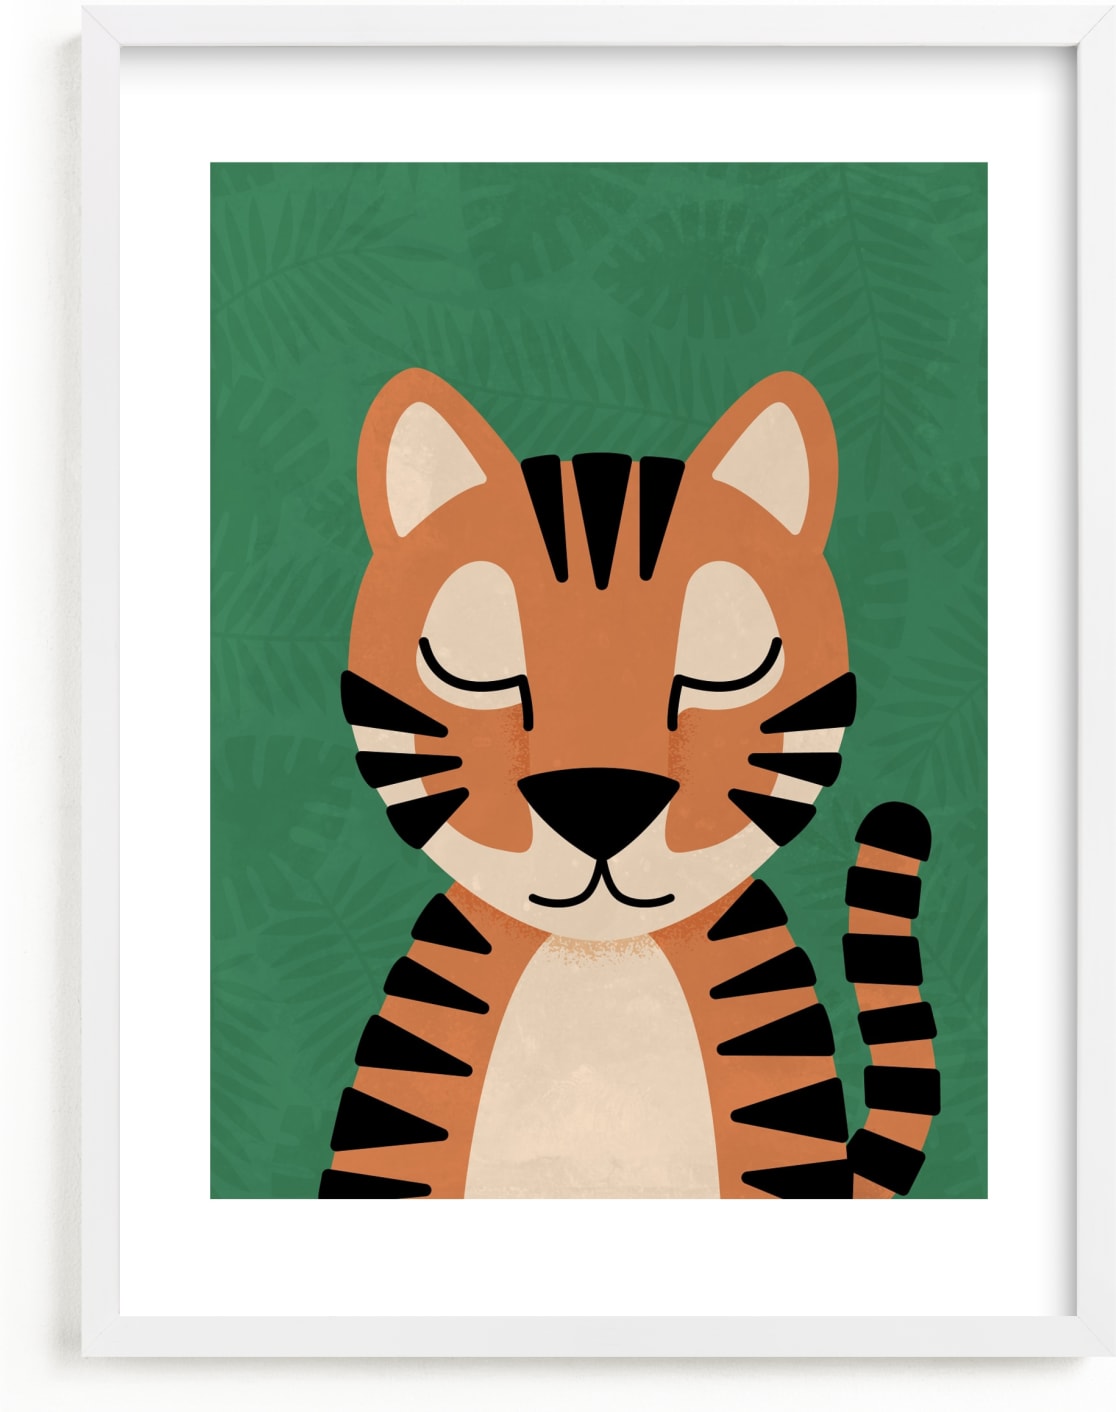 This is a colorful kids wall art by 2birdstone called Jungle Tiger.